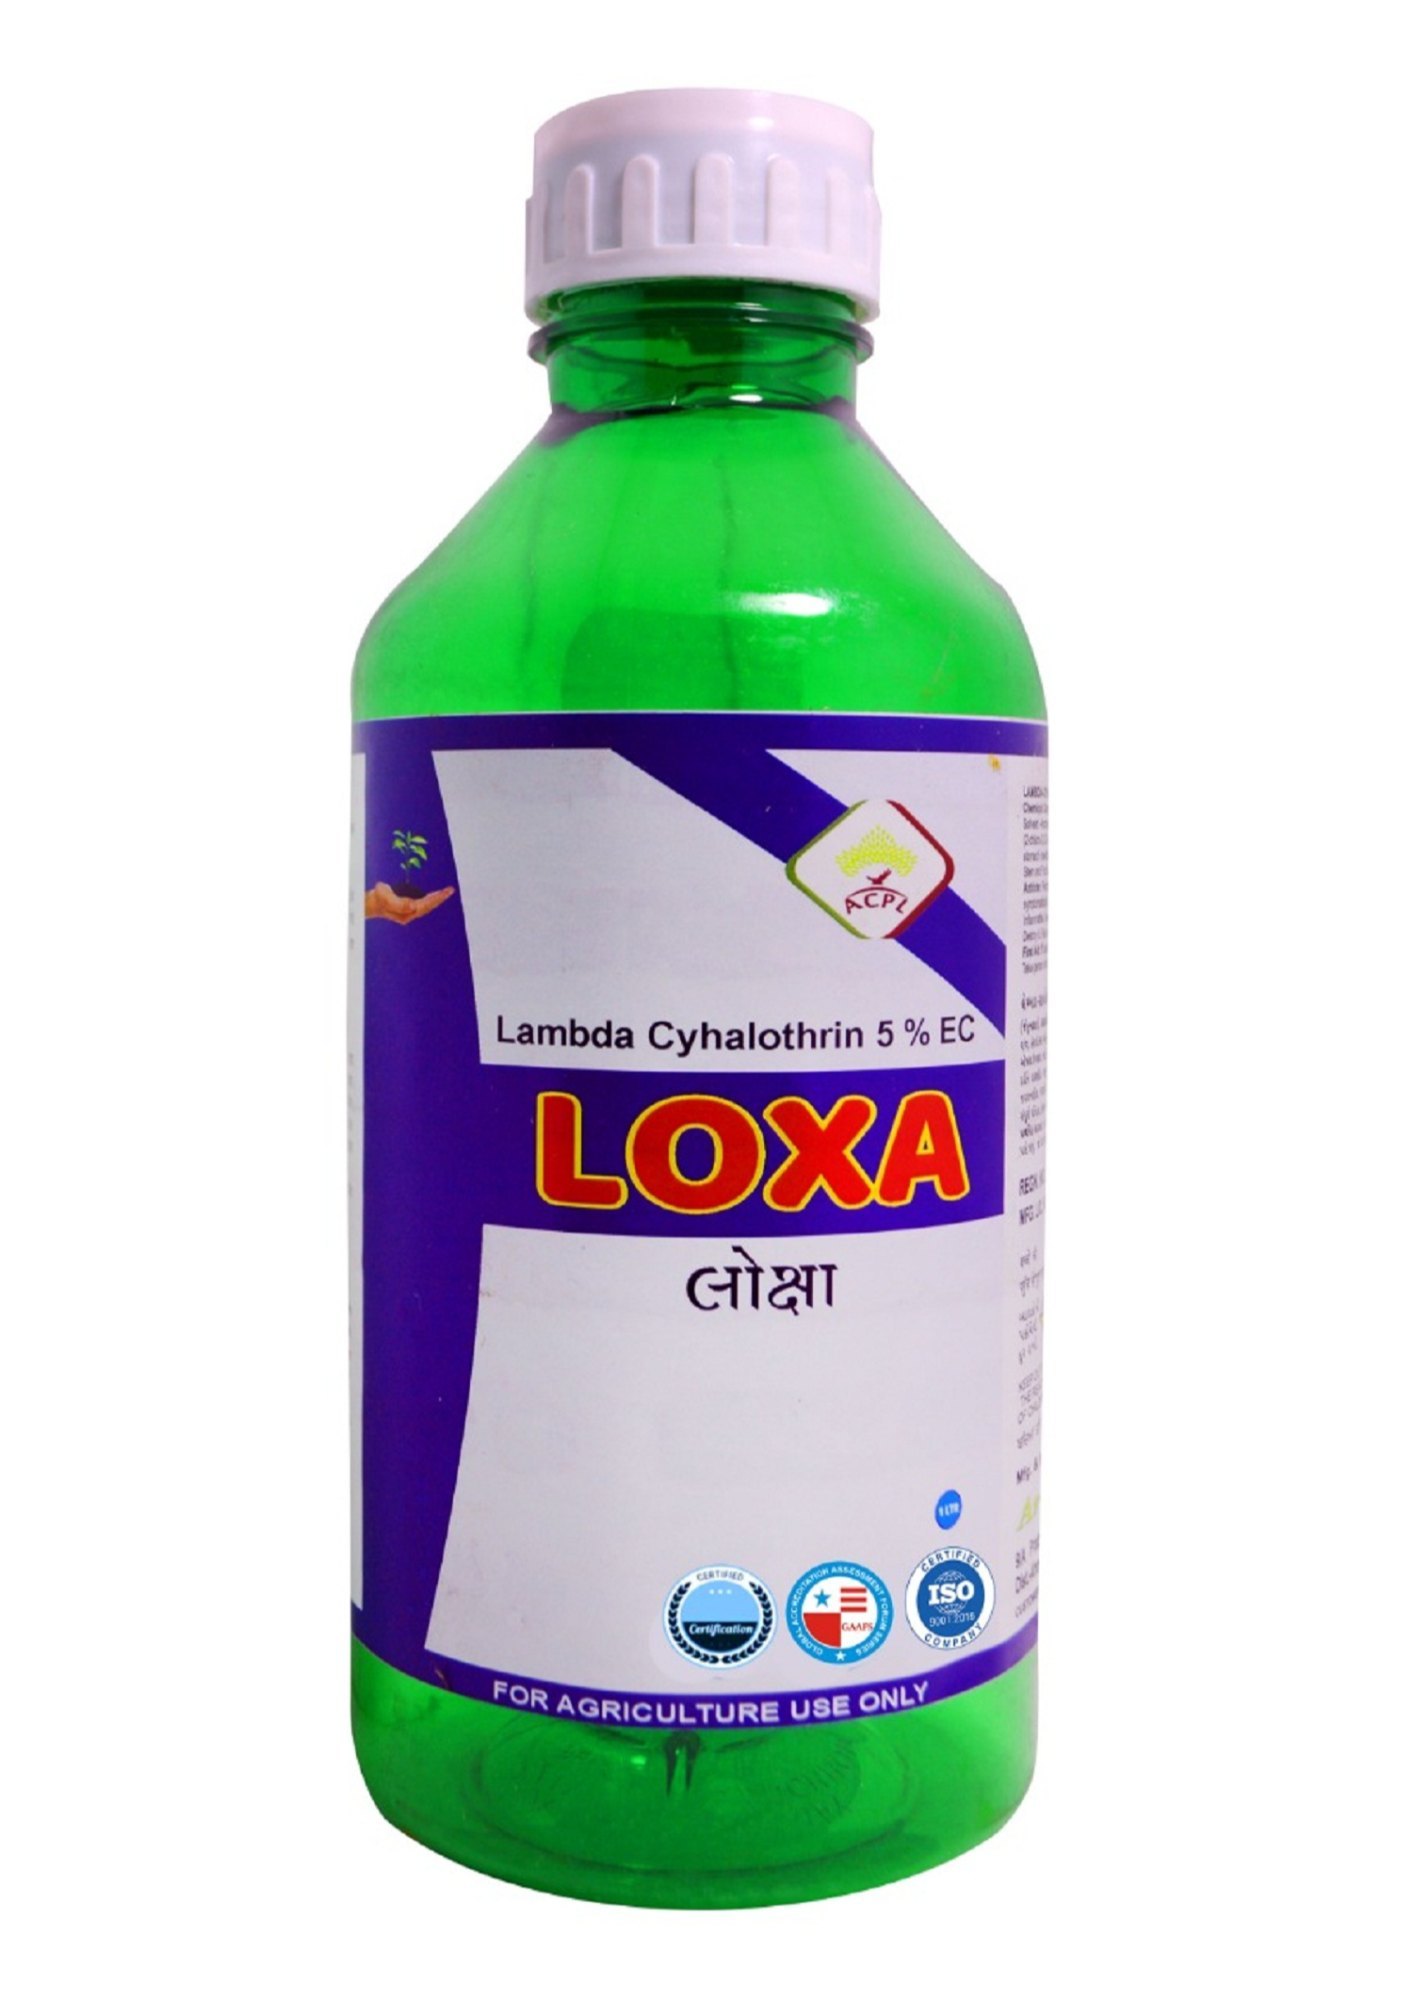 insecticides - Lambda Cyhalothrin % Cs Insecticides Manufacturer from Rajkot